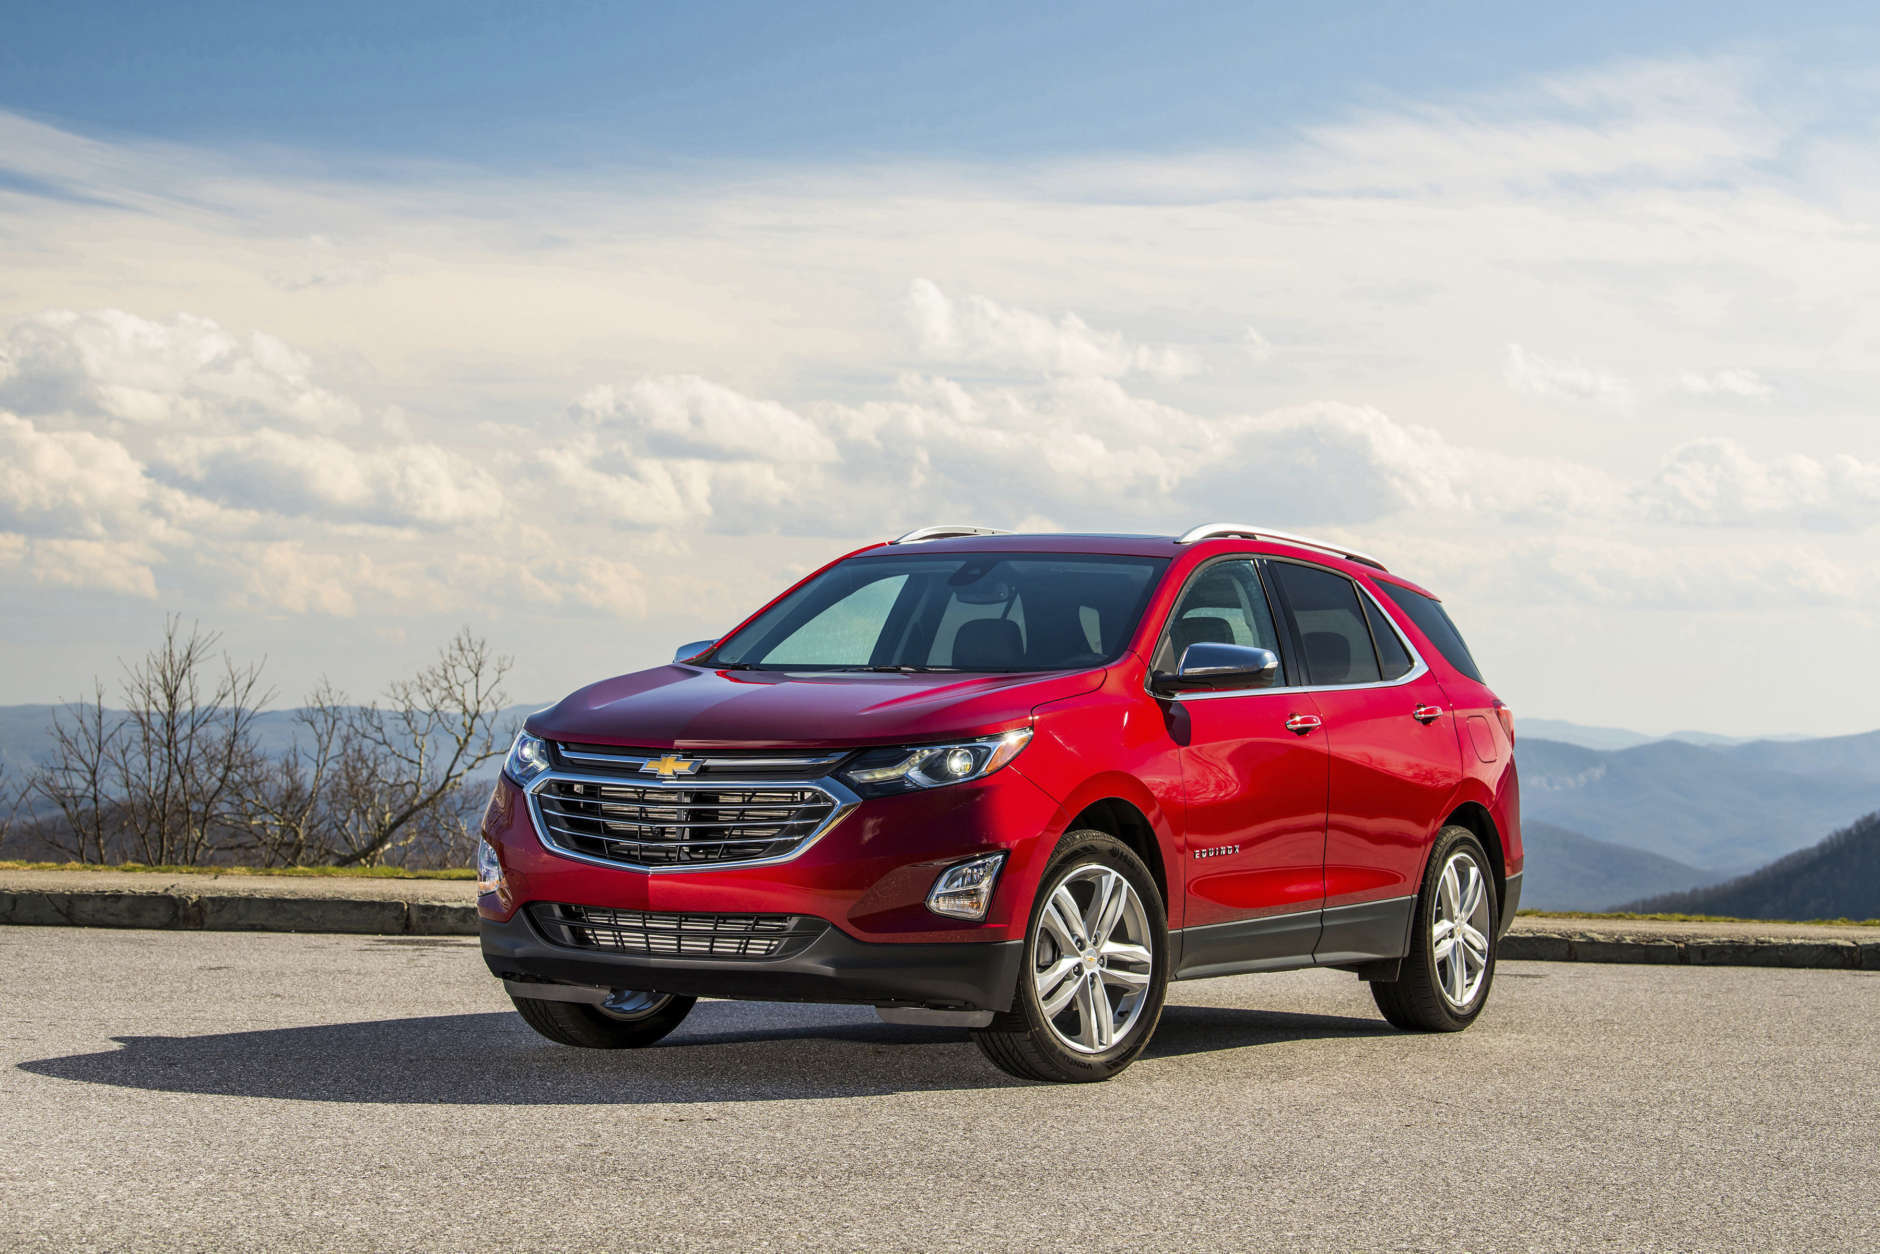 This photo provided by General Motors Co. shows the 2018 Chevrolet Equinox, an example of a vehicle that has features parents will love. One feature in particular is the installation of multiple USB charging ports, which give all passengers the ability to charge mobile devices while traveling. (Jessica Lynn Walker/Courtesy of General Motors Co. via AP)